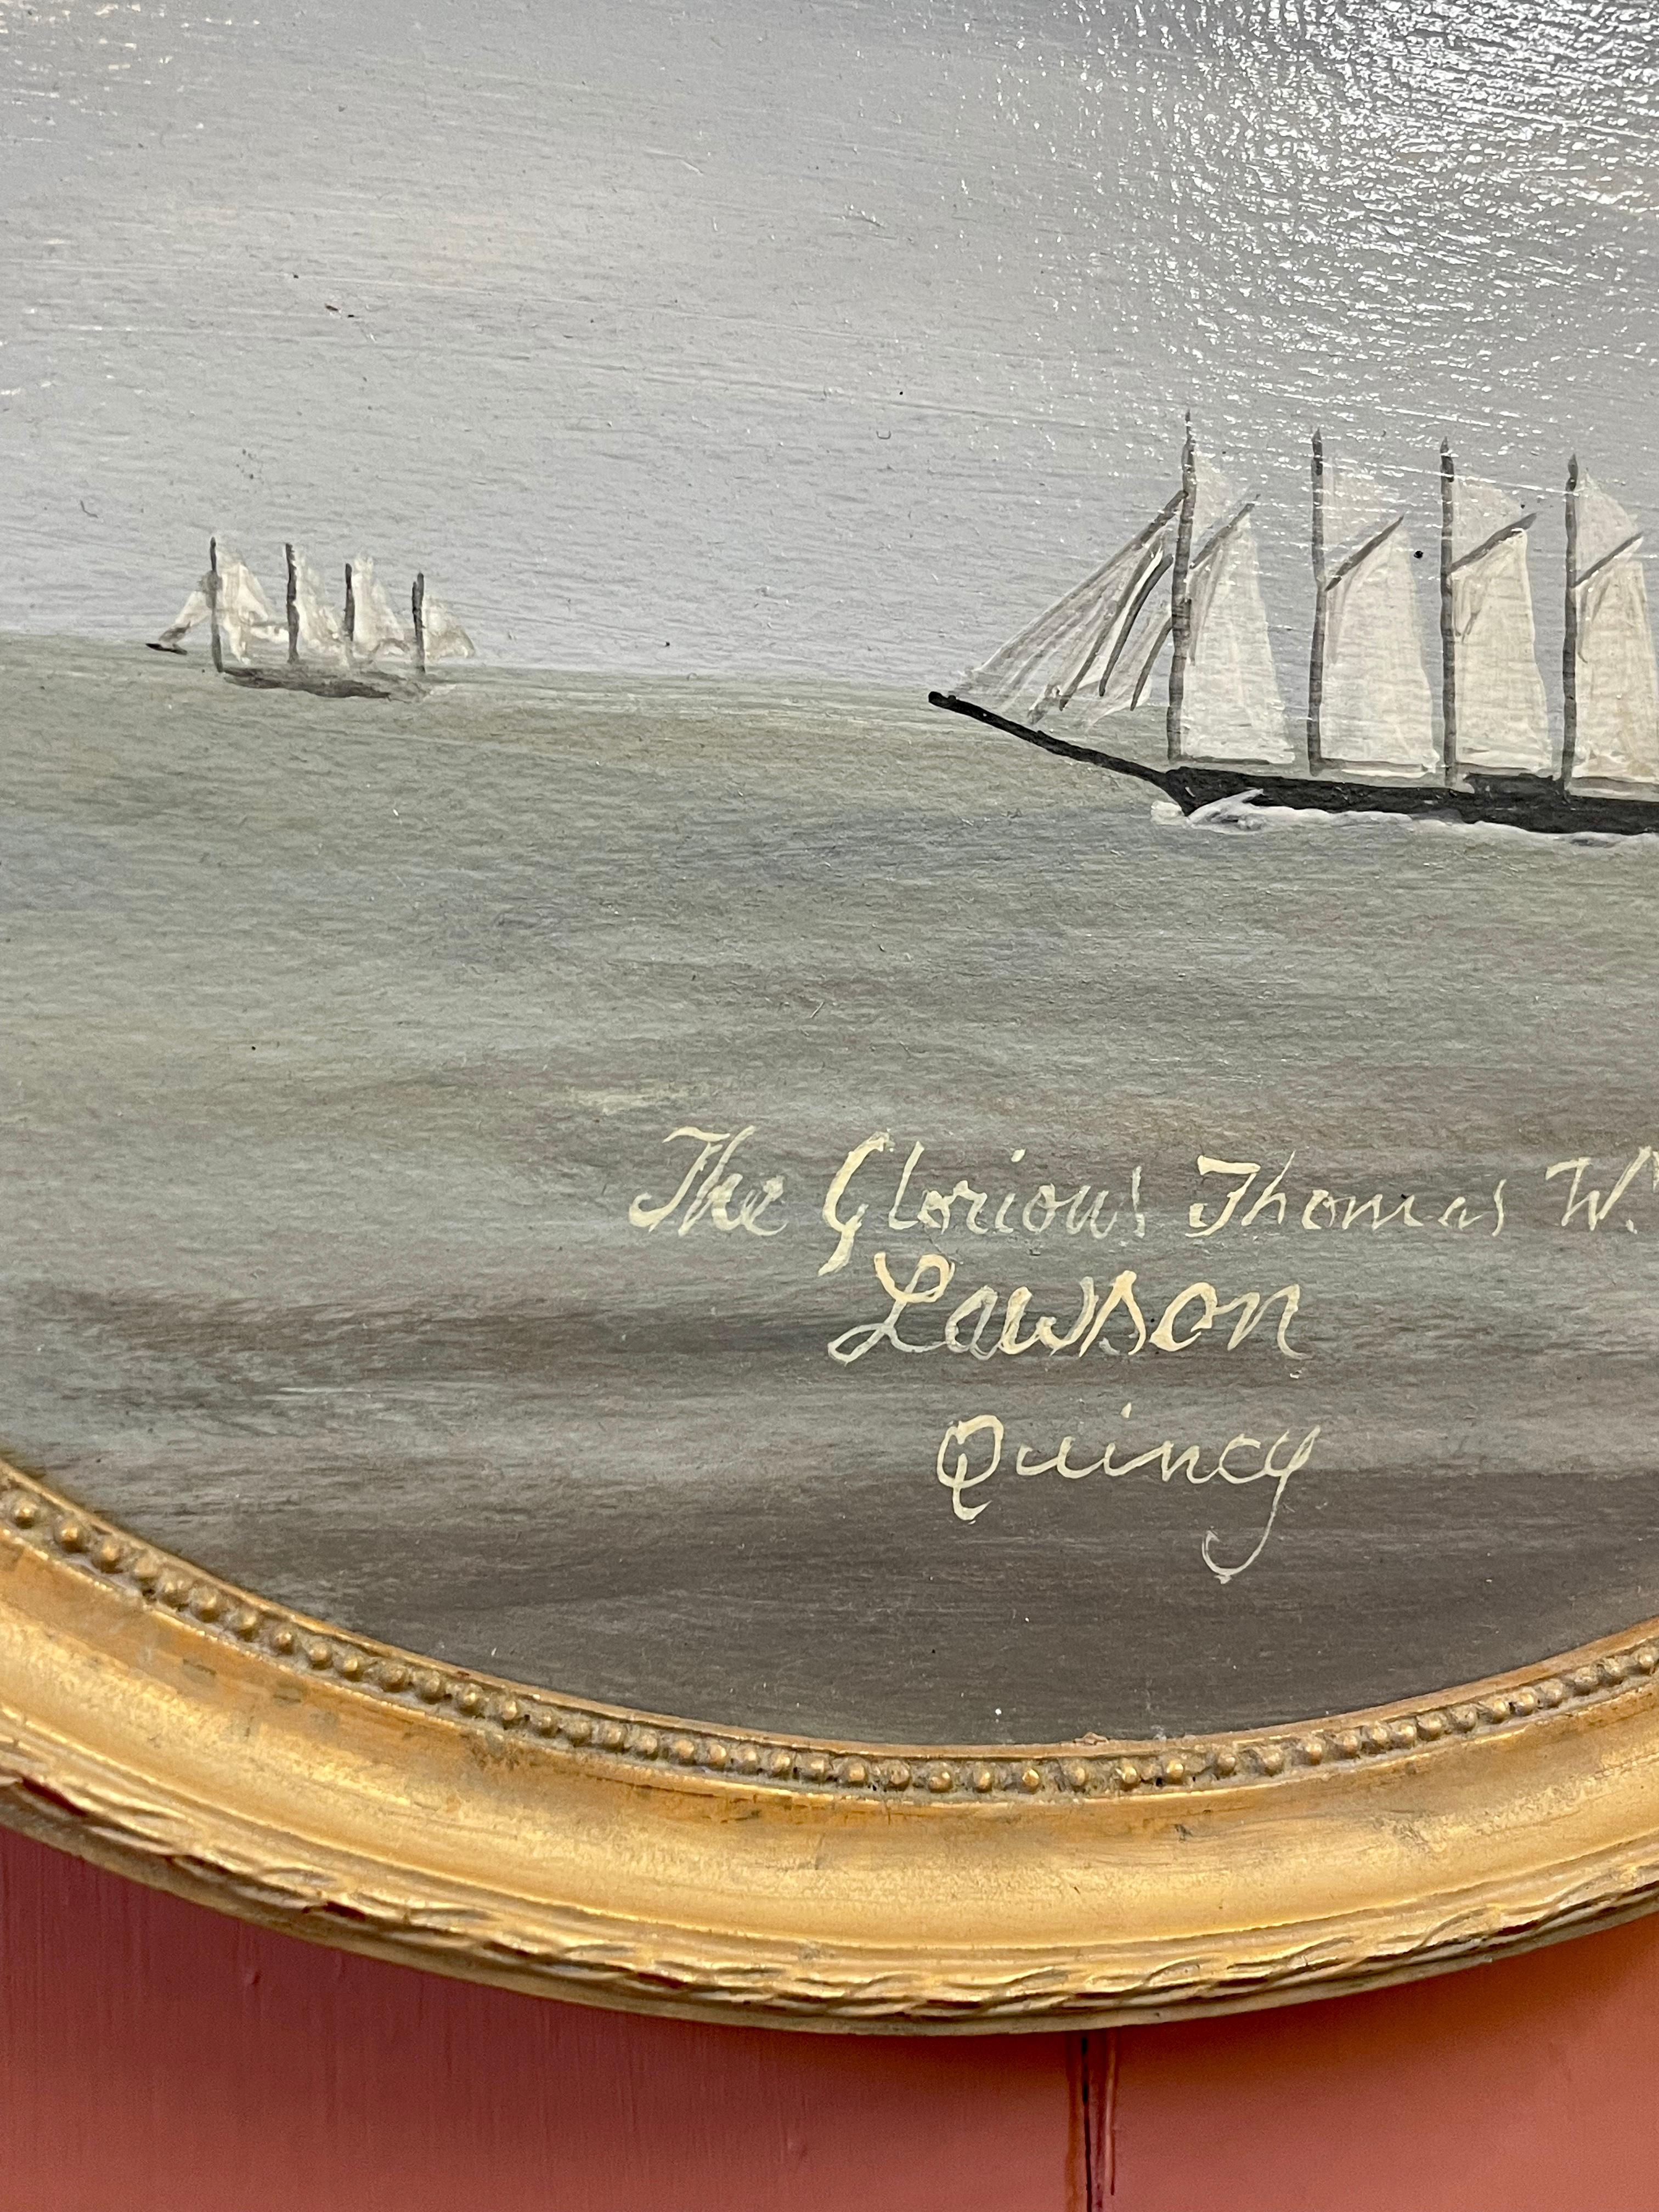 Mid-20th Century Oval Seascape Ship Painting of the 